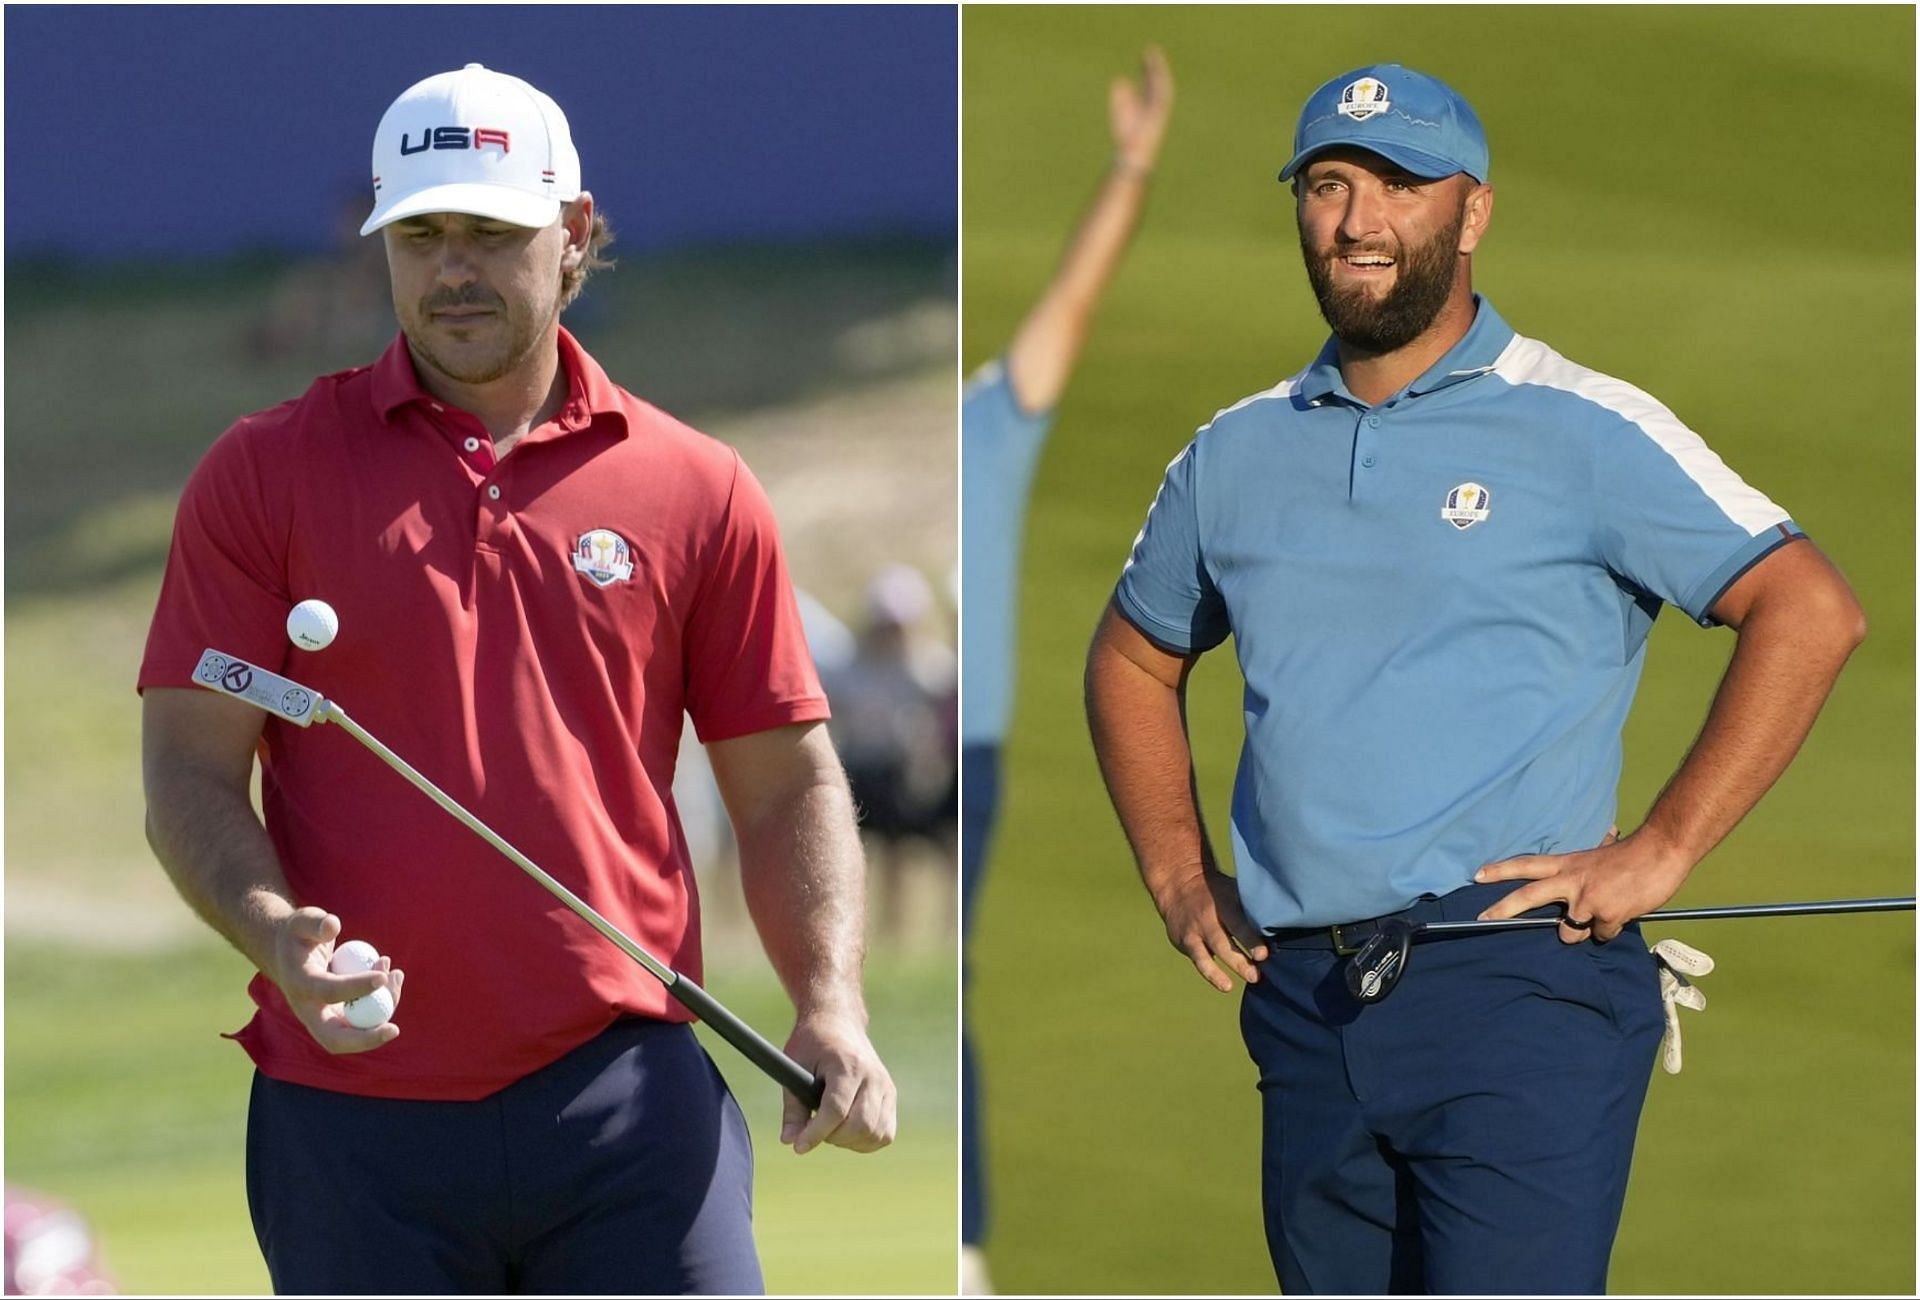 Brooks Koepka and Jon Rahm at the 2023 Ryder Cup (via Getty Images)